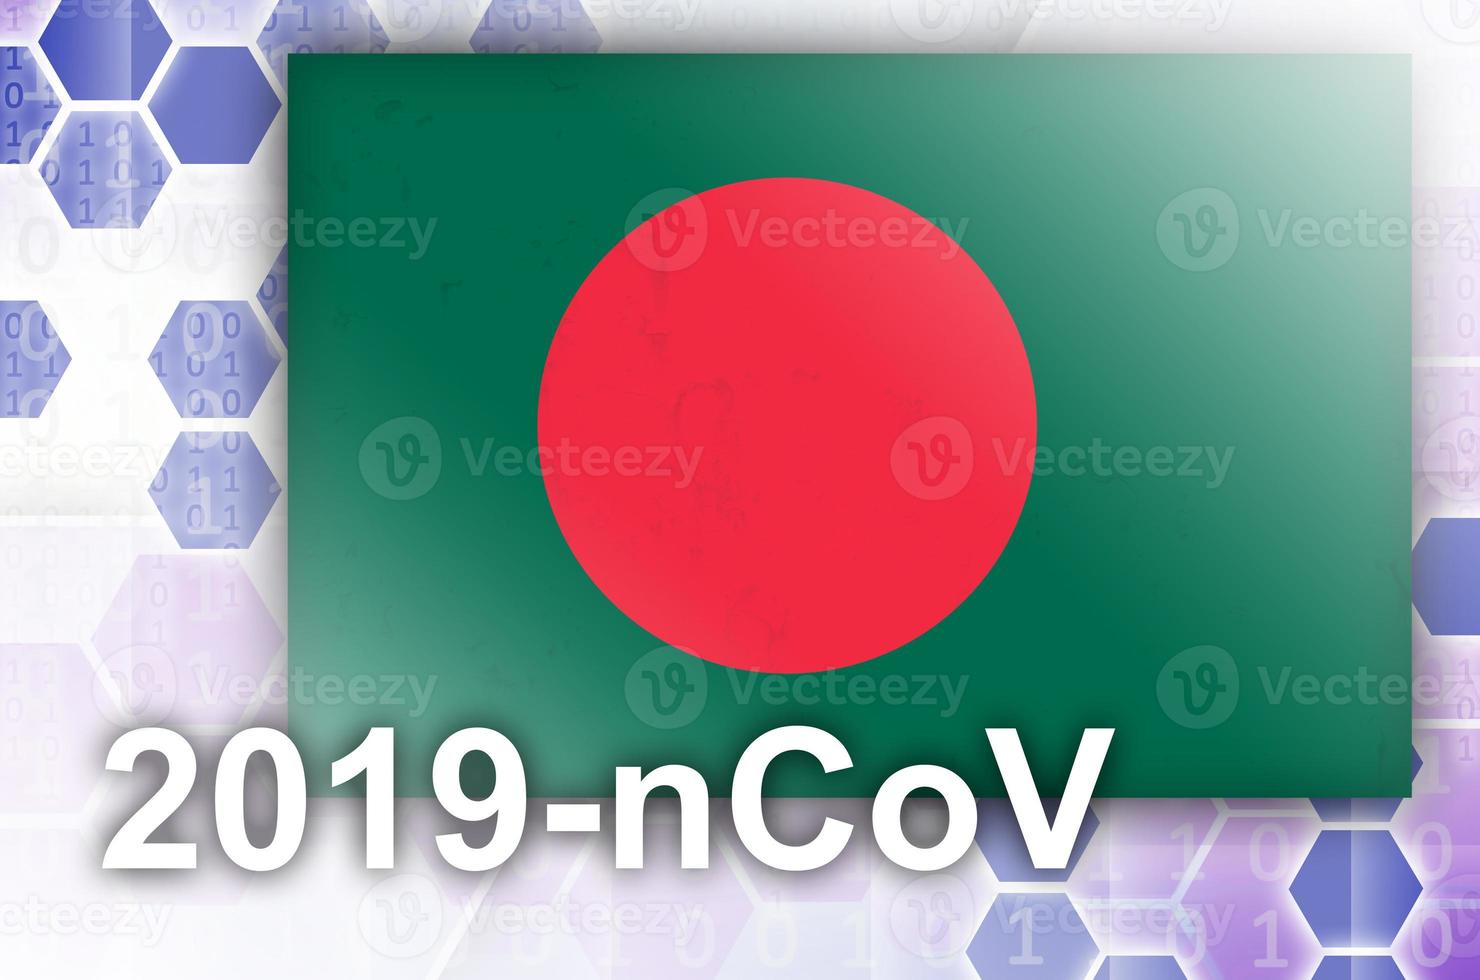 Bangladesh flag and futuristic digital abstract composition with 2019-nCoV inscription. Covid-19 outbreak concept photo